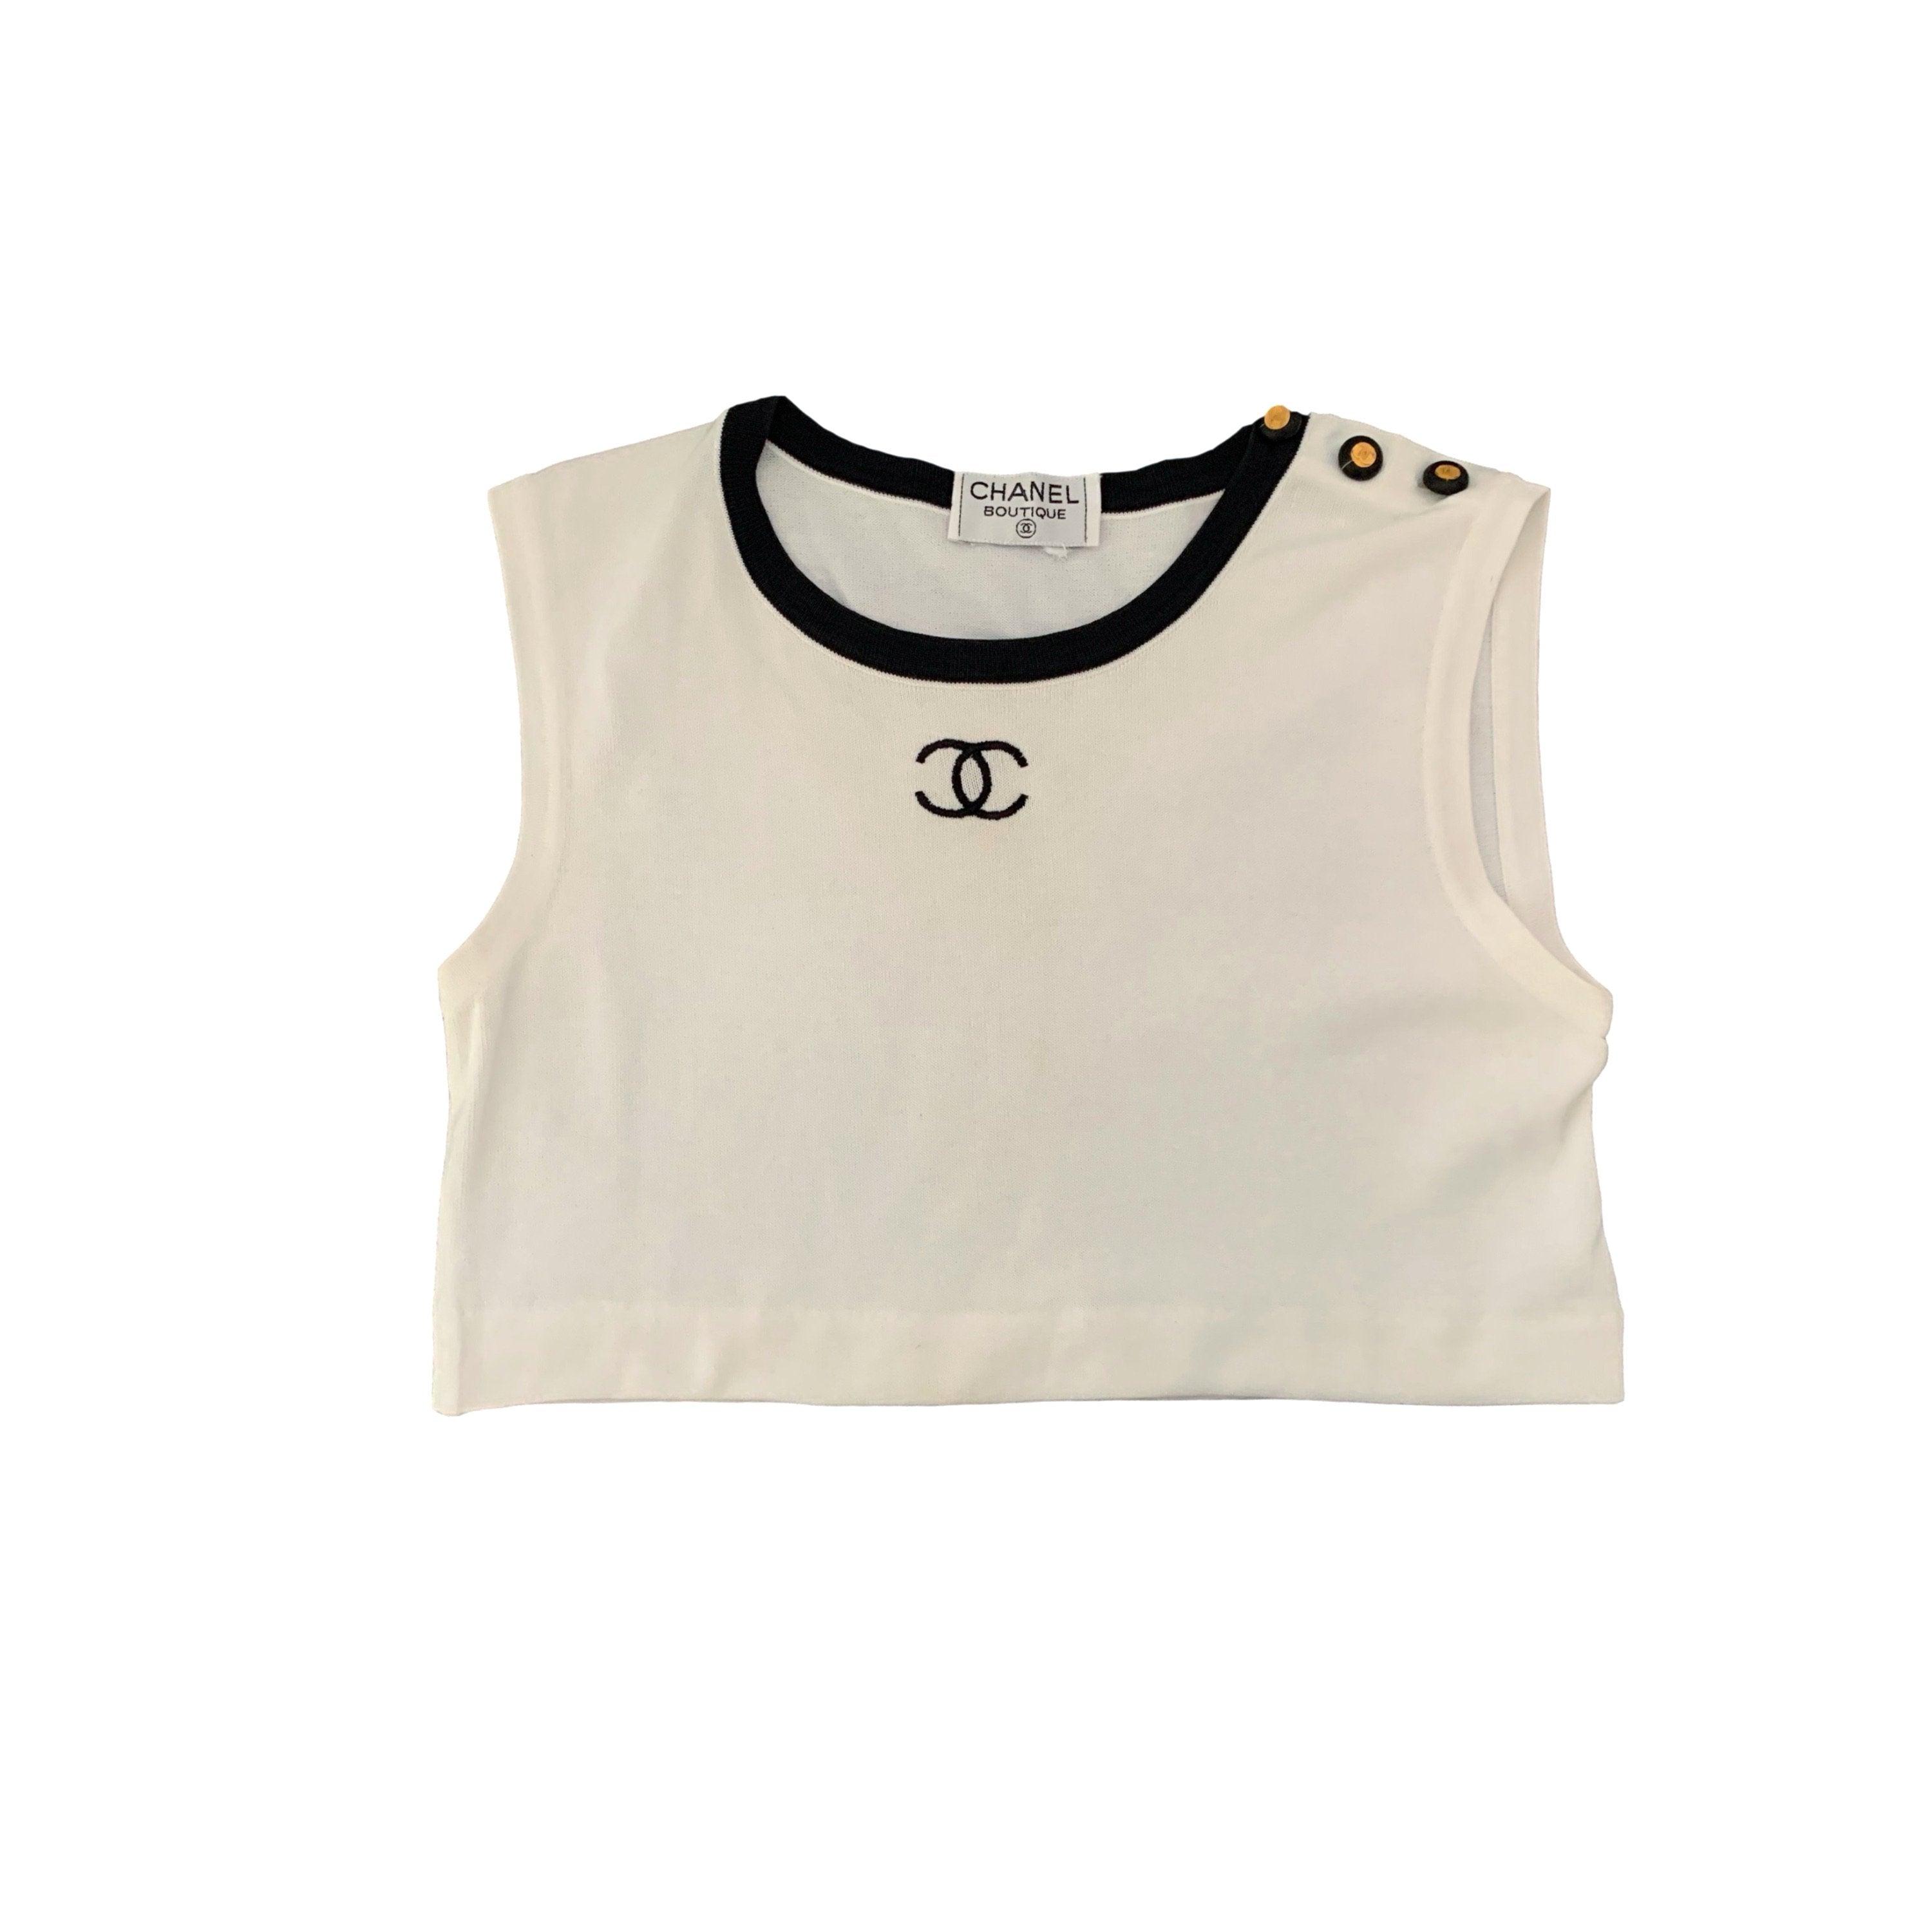 Chanel Cropped Top 